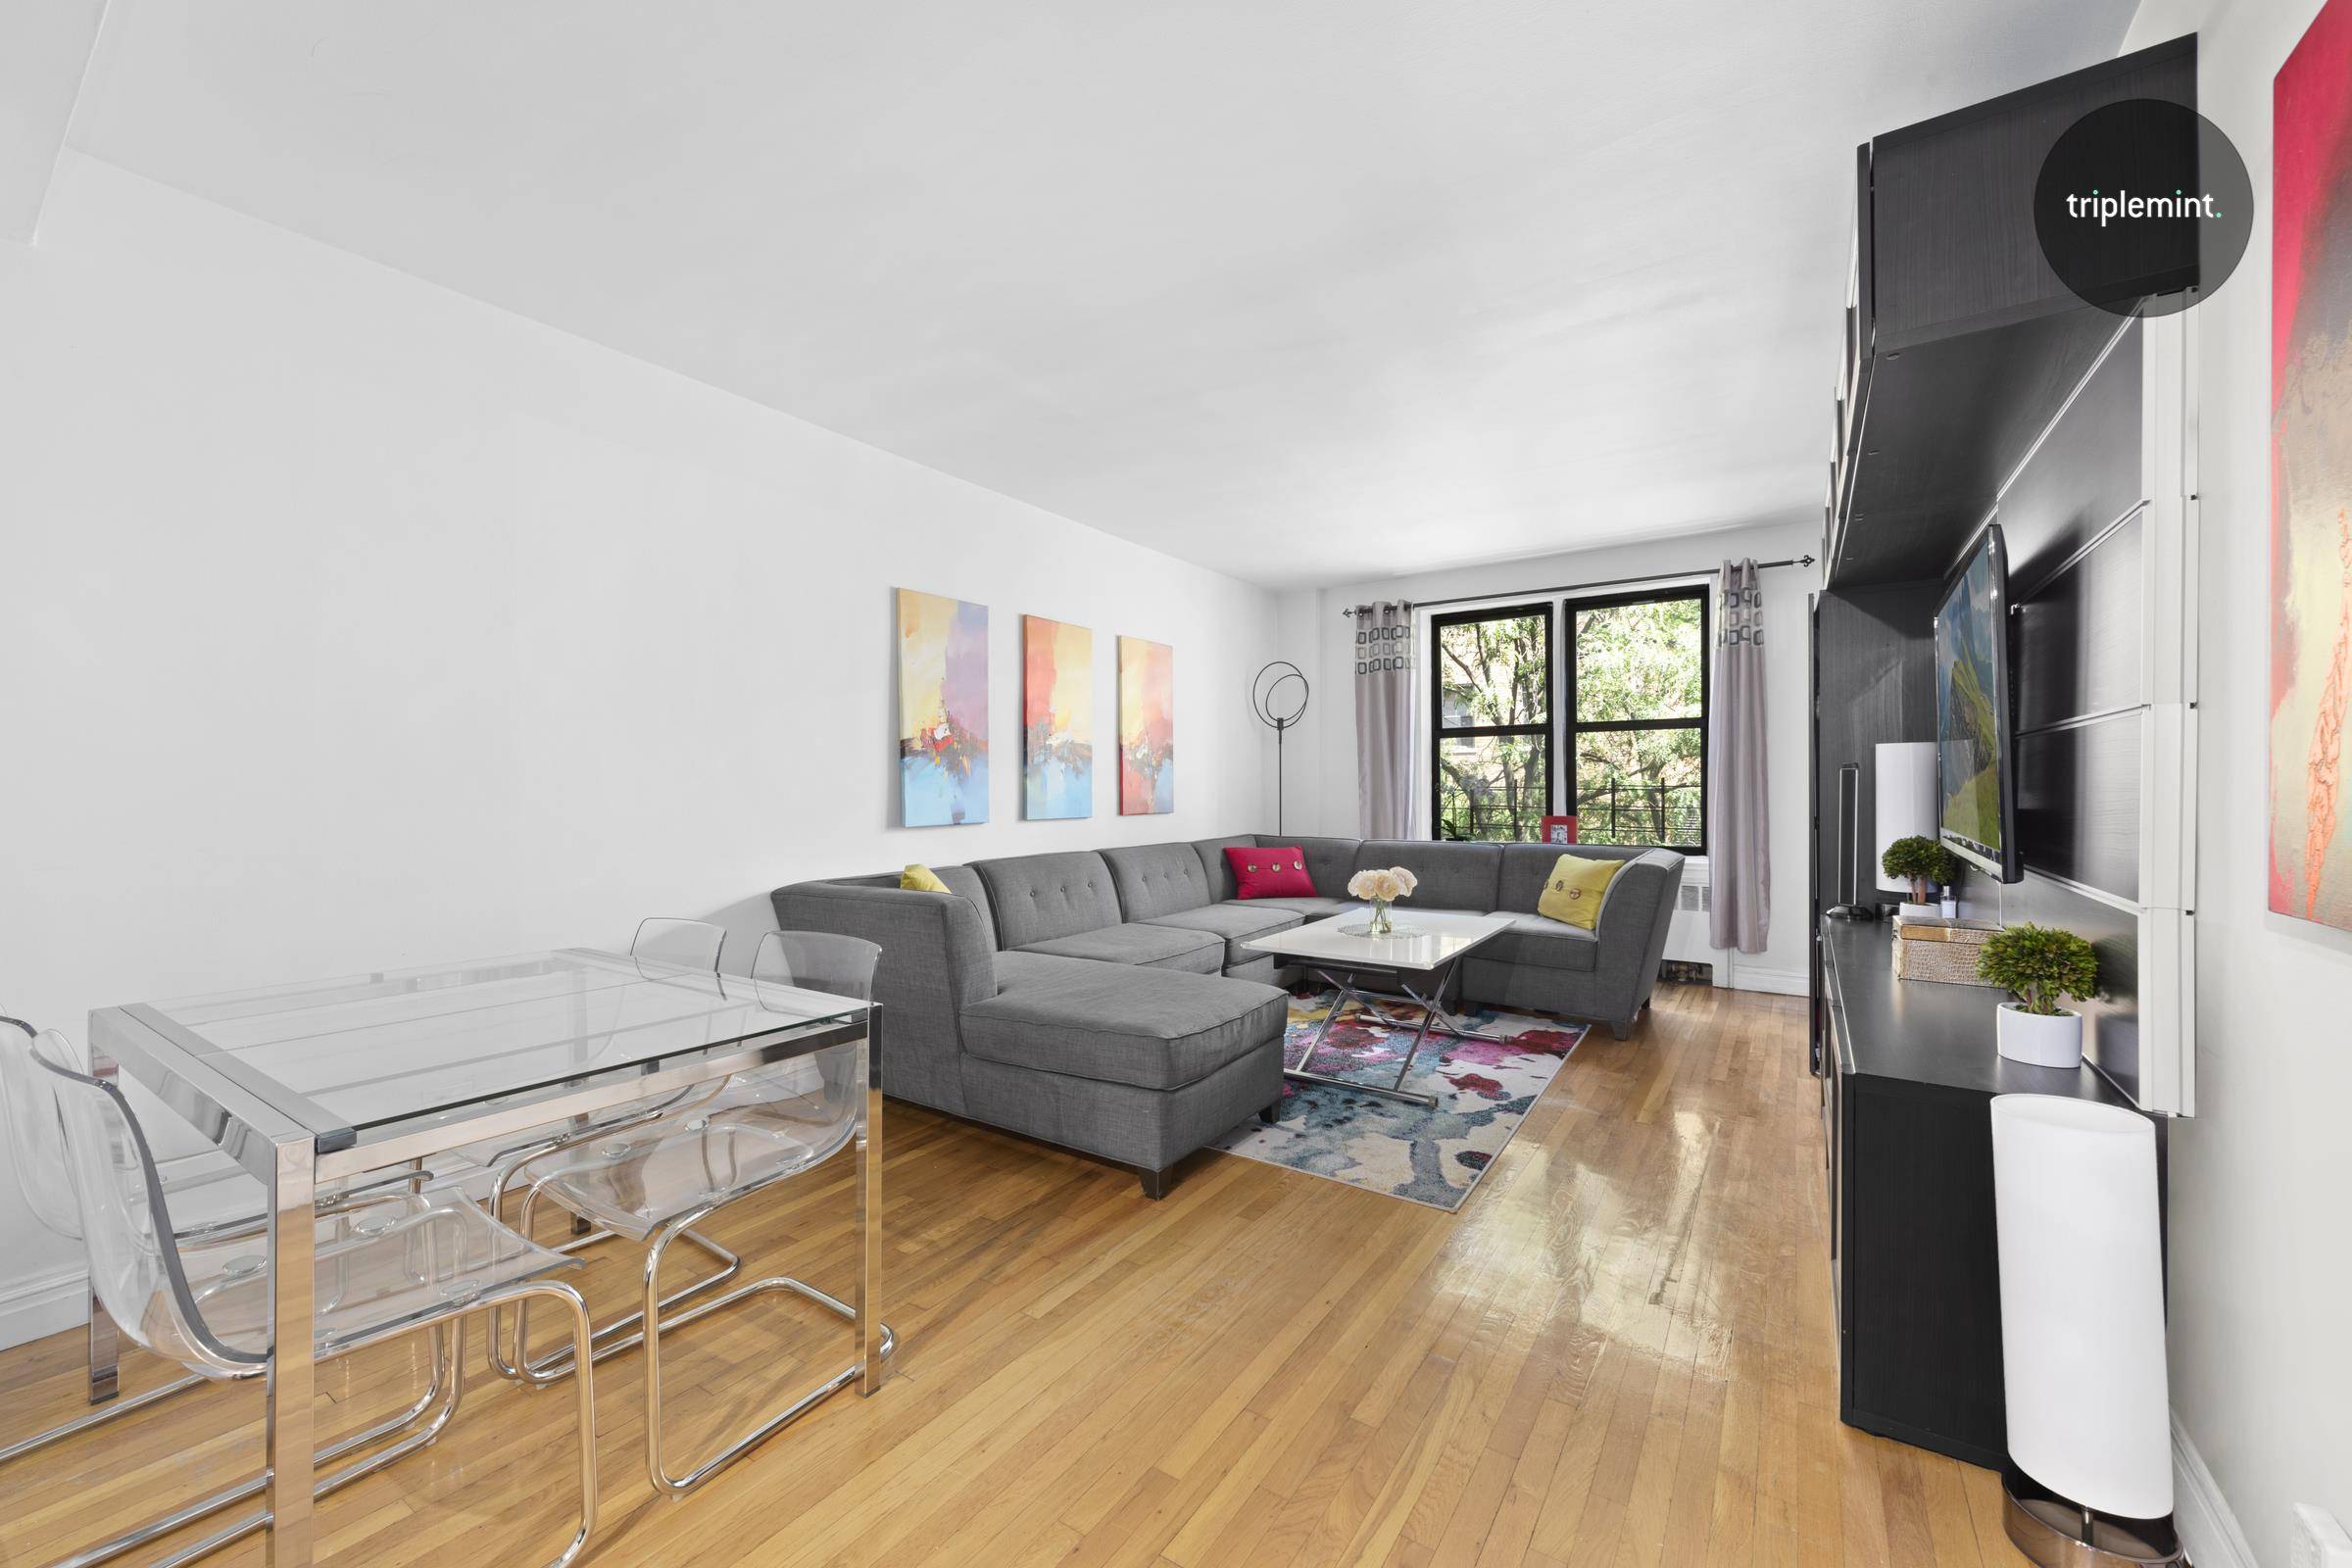 Located on one of the Upper East Side's most beautiful tree lined blocks, this two bedroom, two bathroom home with washer dryer in unit is ready for any discerning buyer.